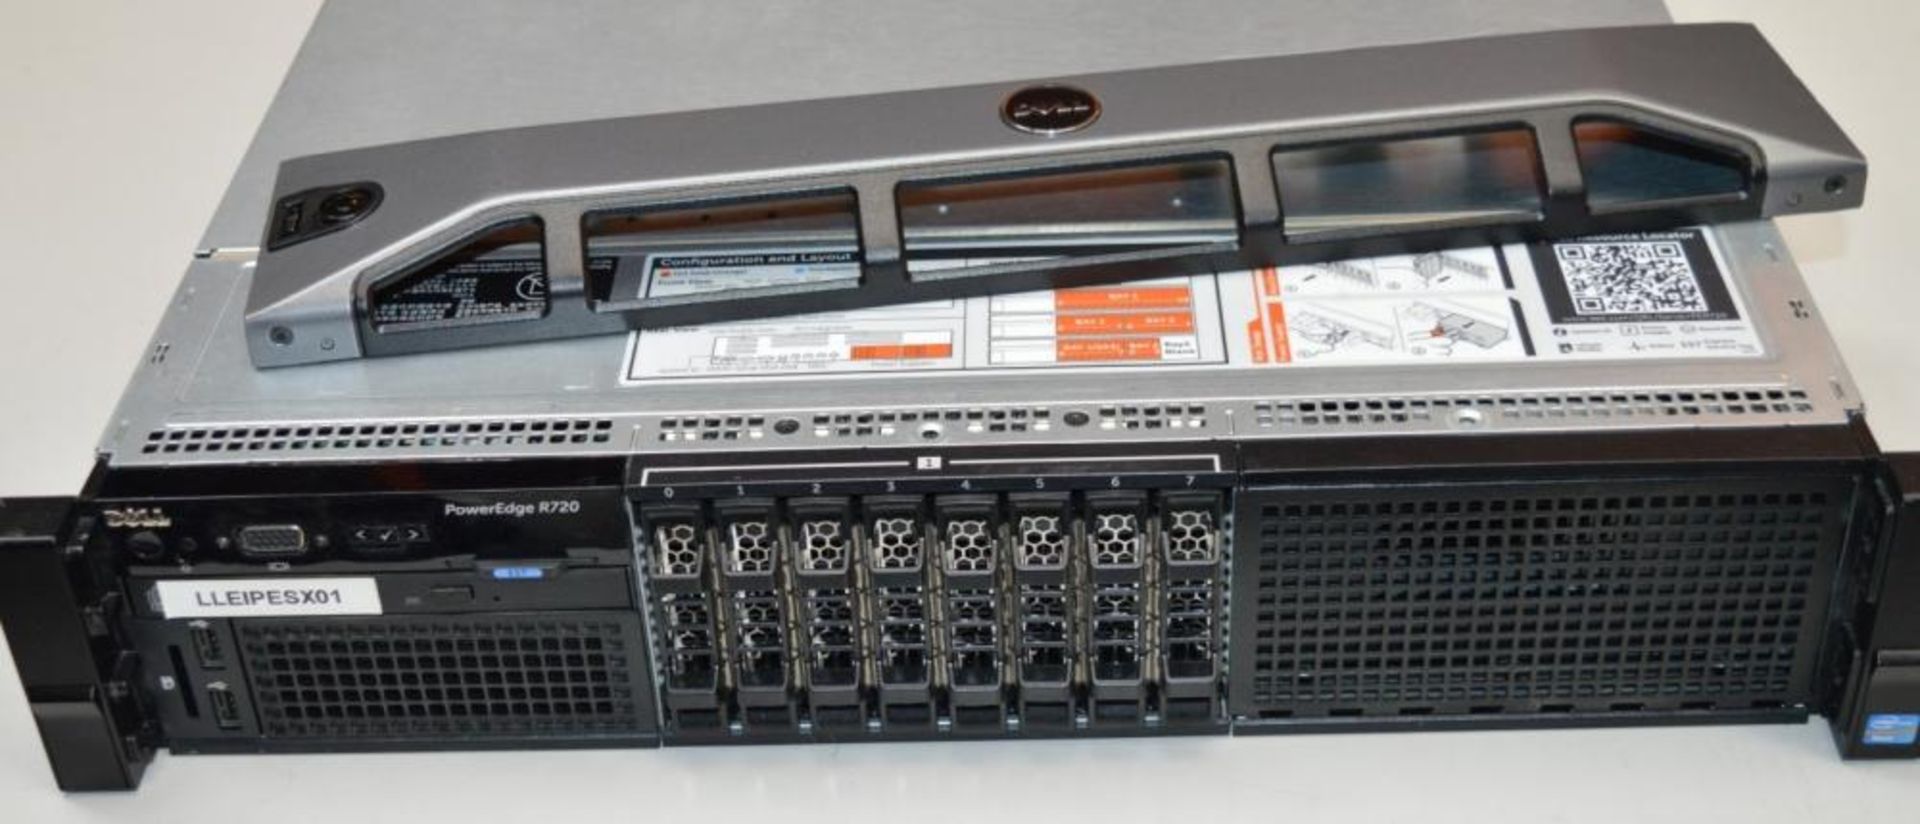 1 x Dell Power Edge R720 Rack Server - Features 2 x Intel Xeon E5-2630 Six Core CPU, 128gb DDR3 Ram - Image 4 of 6